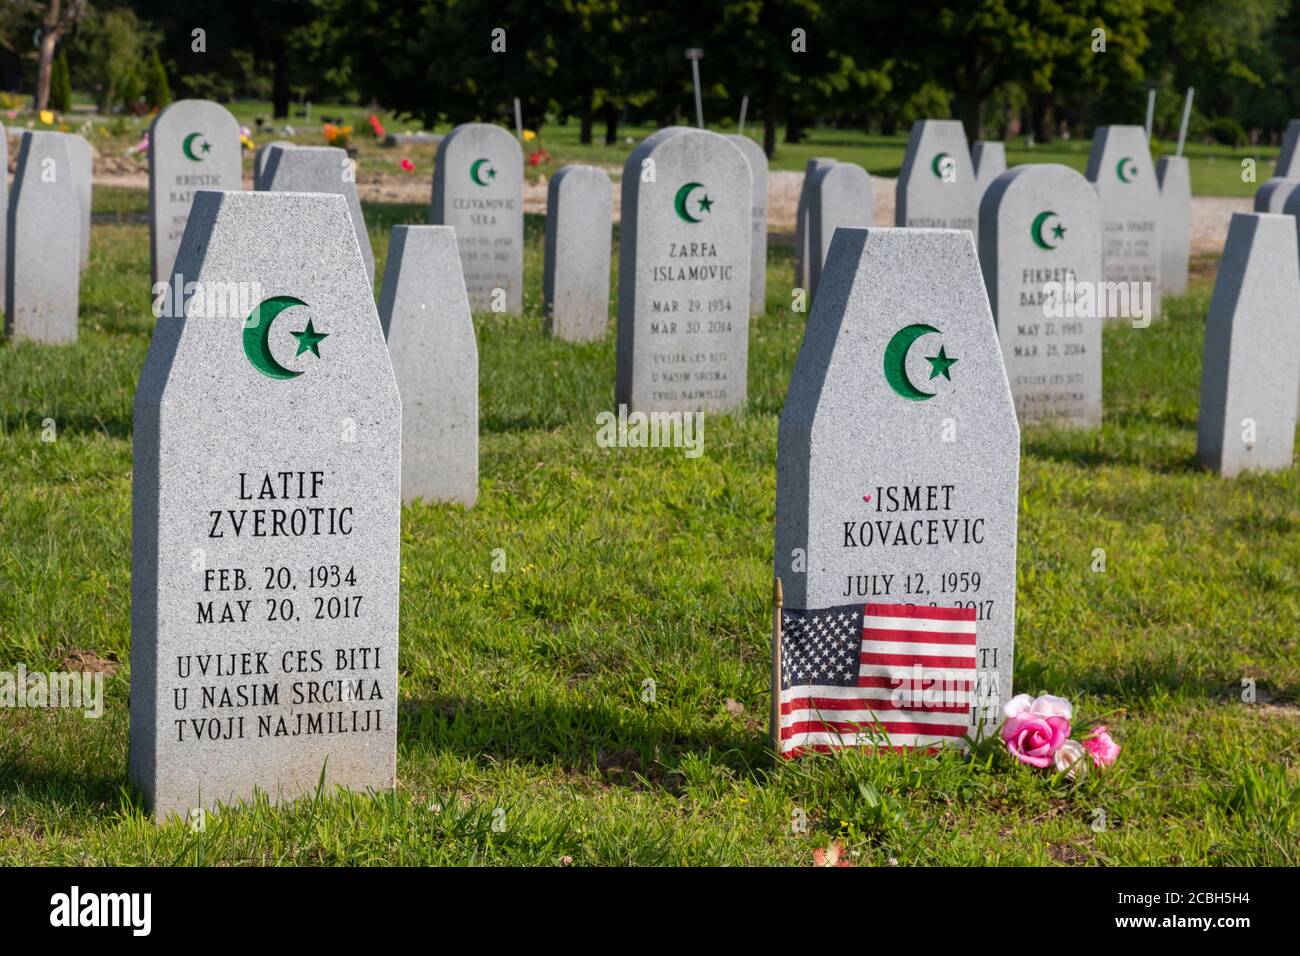 Detroit, Michigan - Graves in the Bosnian-American Islamic Garden section of Woodmere Cemetery. Stock Photo